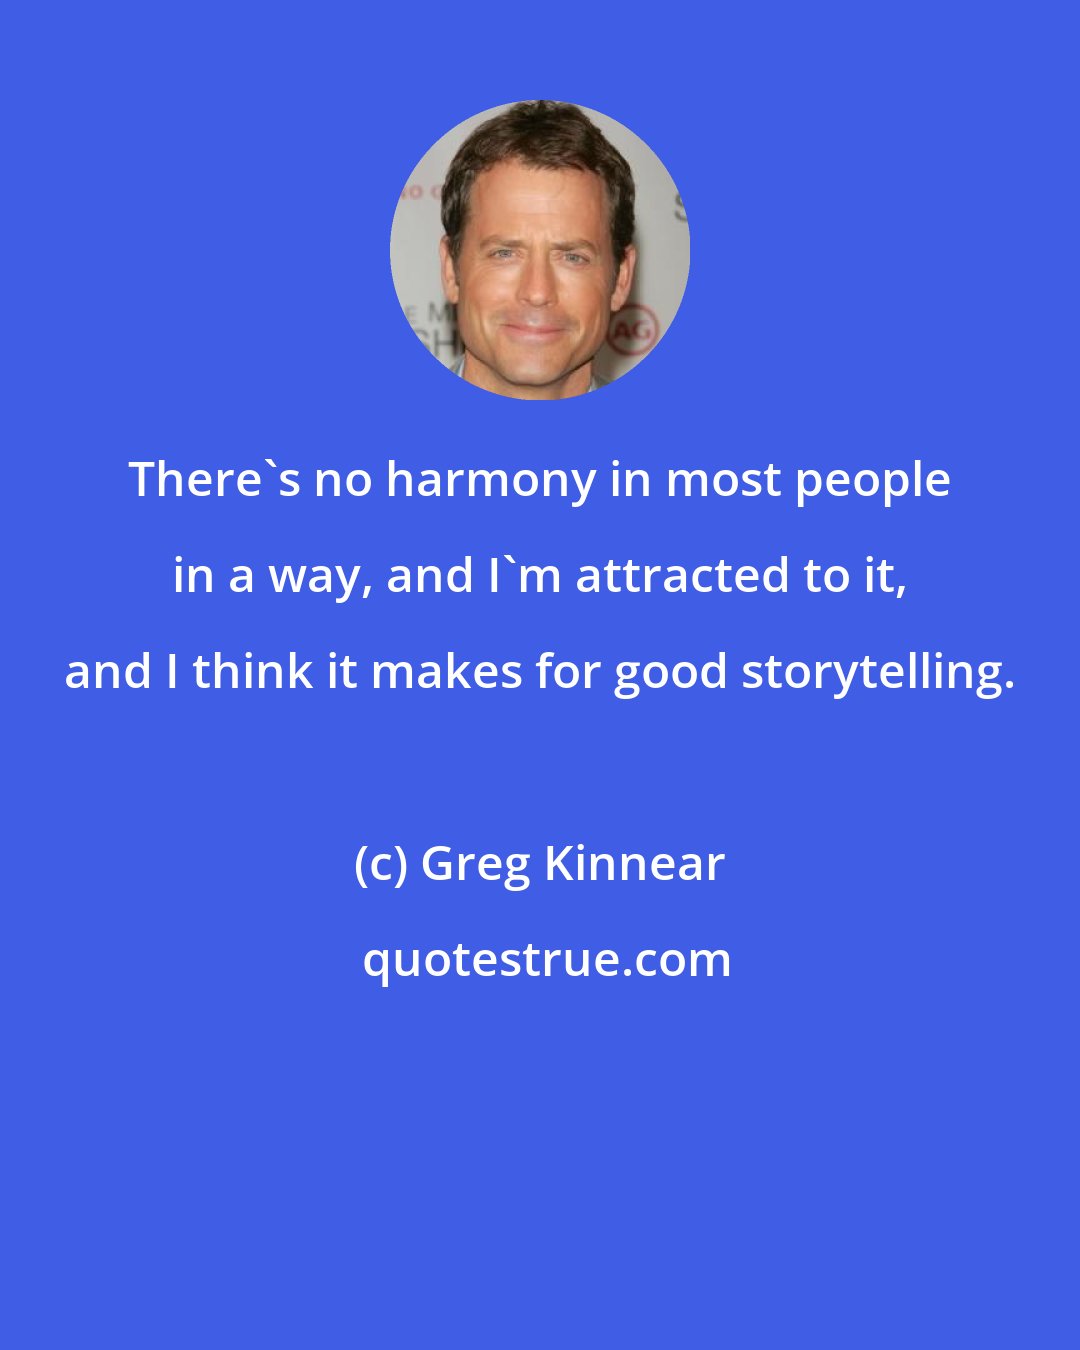 Greg Kinnear: There's no harmony in most people in a way, and I'm attracted to it, and I think it makes for good storytelling.